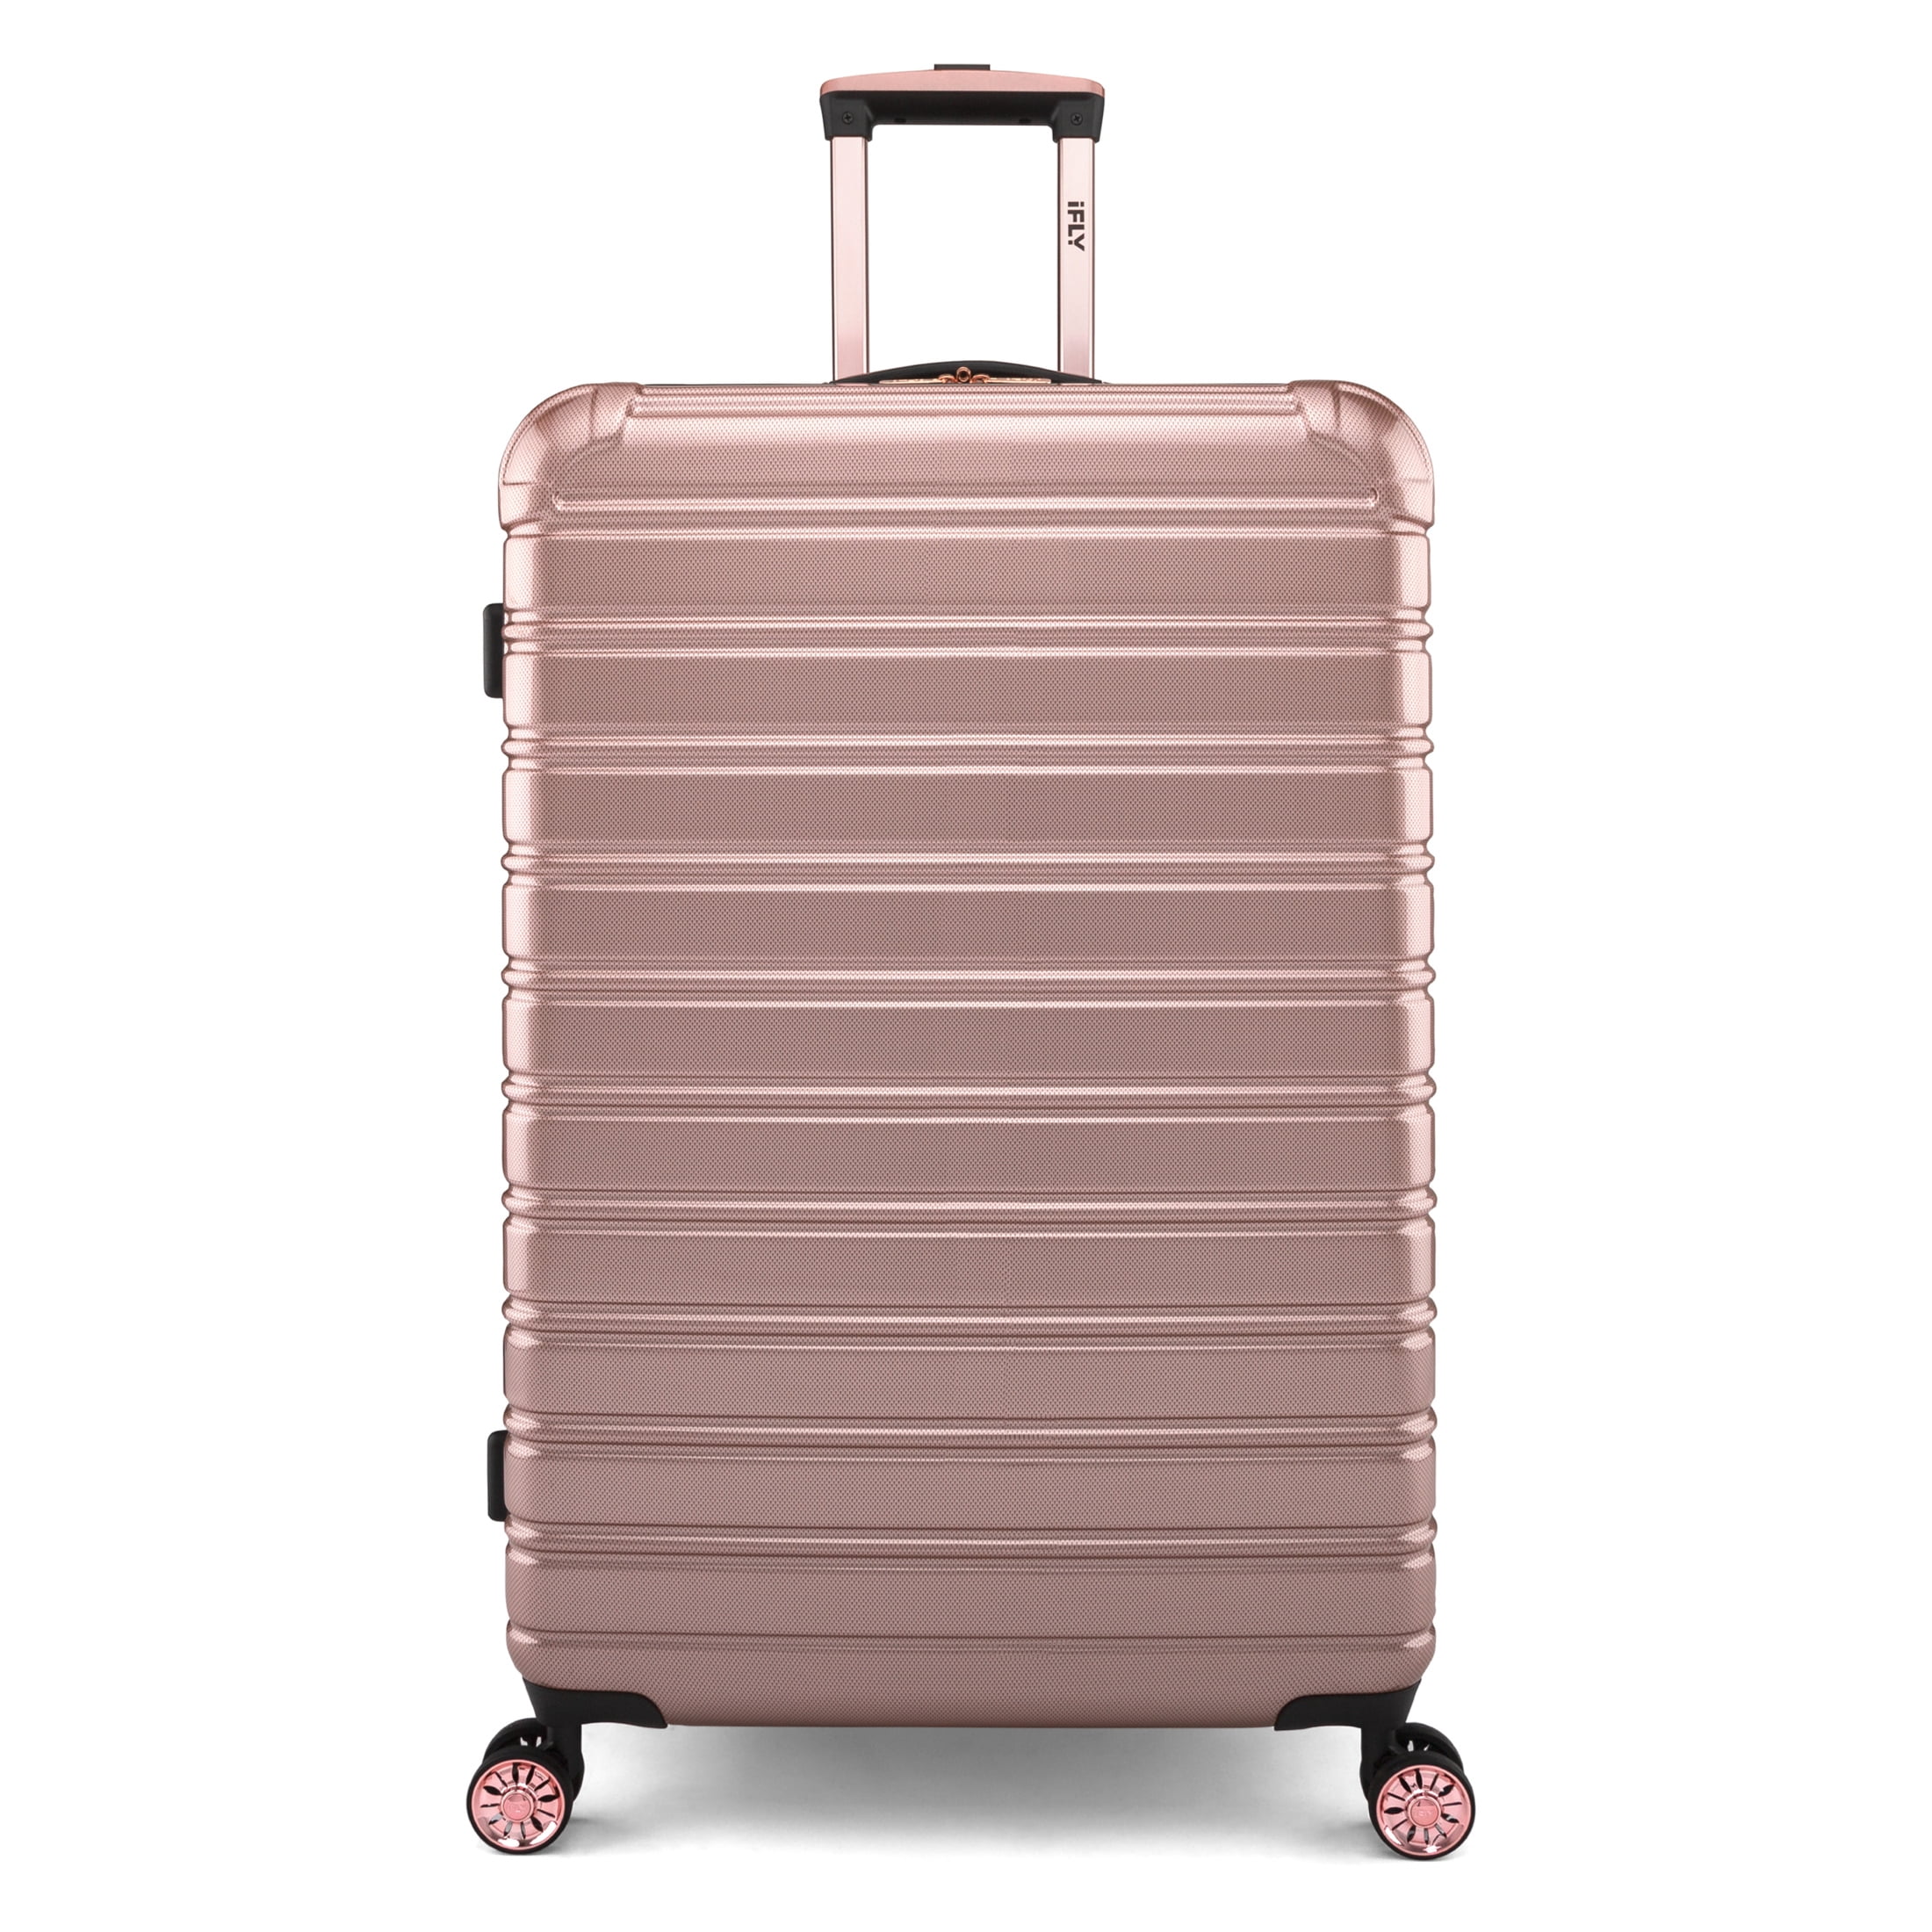 iFLY Hard Sided Fibertech 28" Checked Luggage, Rose Gold Luggage